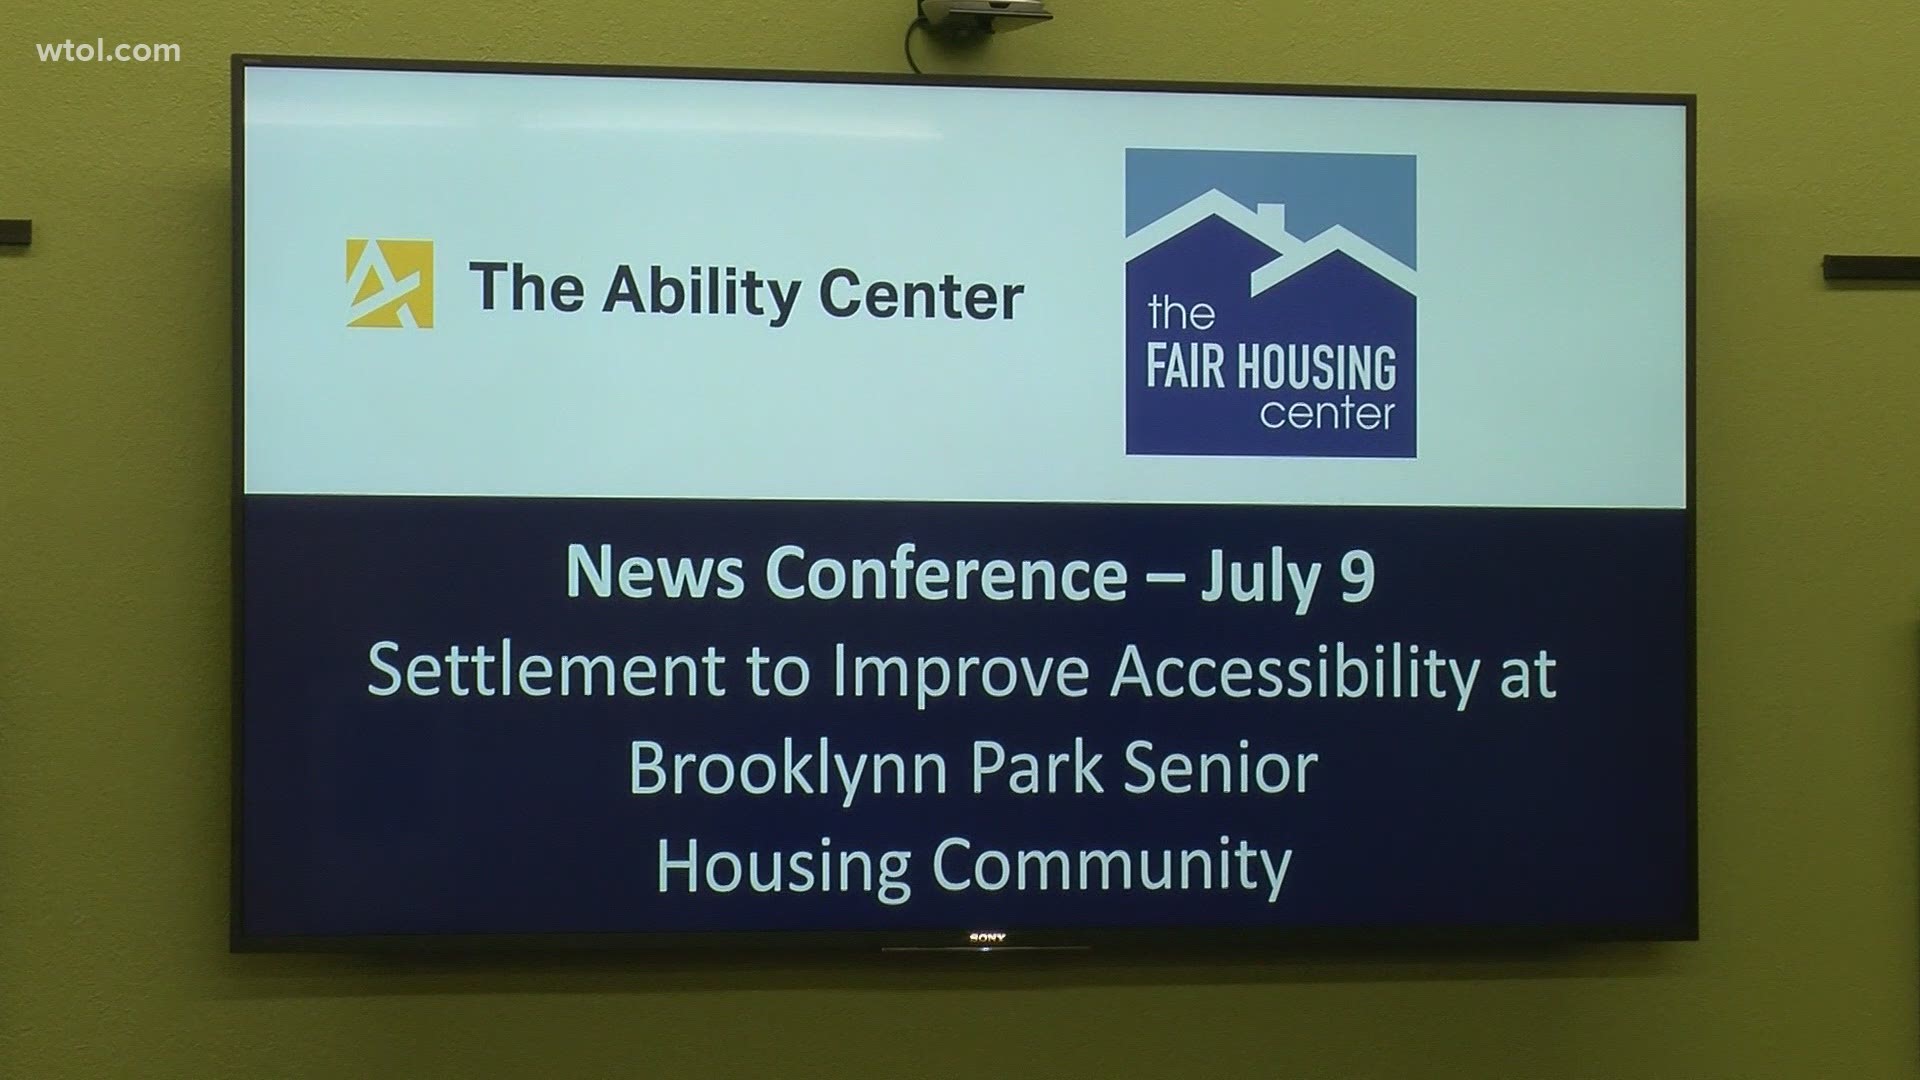 Settlement in a suit filed by Fair Housing Center, The Ability Center and resident Jenny Tillman requires defendants to complete extensive accessibility modification